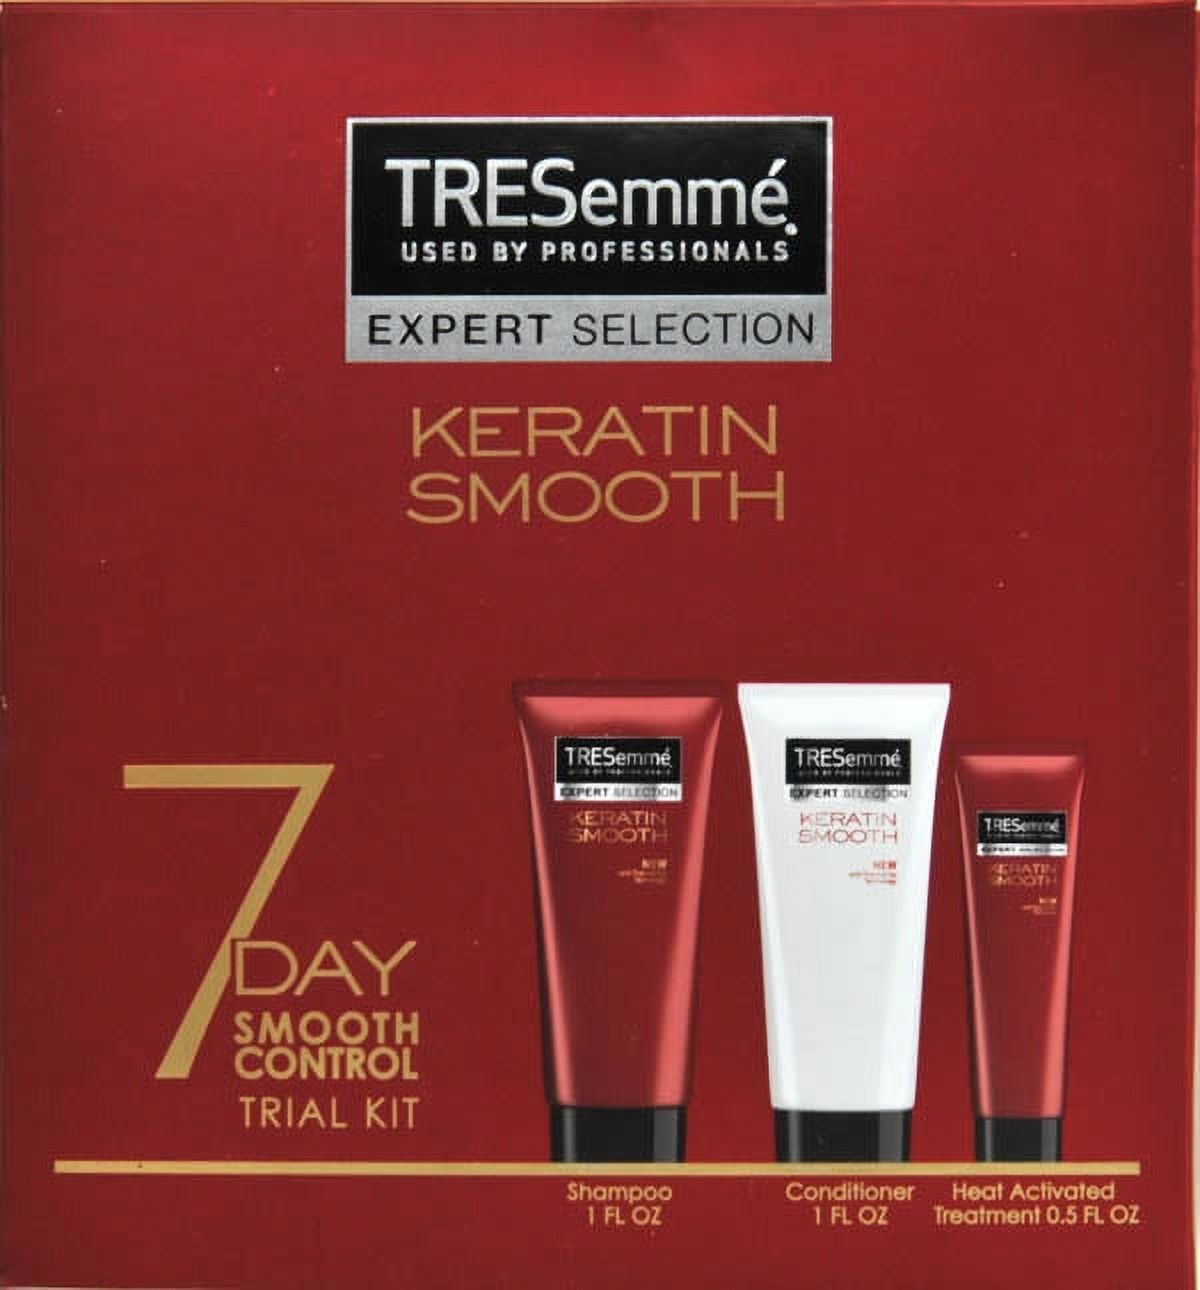 Tresemme Expert Selection Keratin Smooth 7 Day Smooth Control Starter Set - image 2 of 4